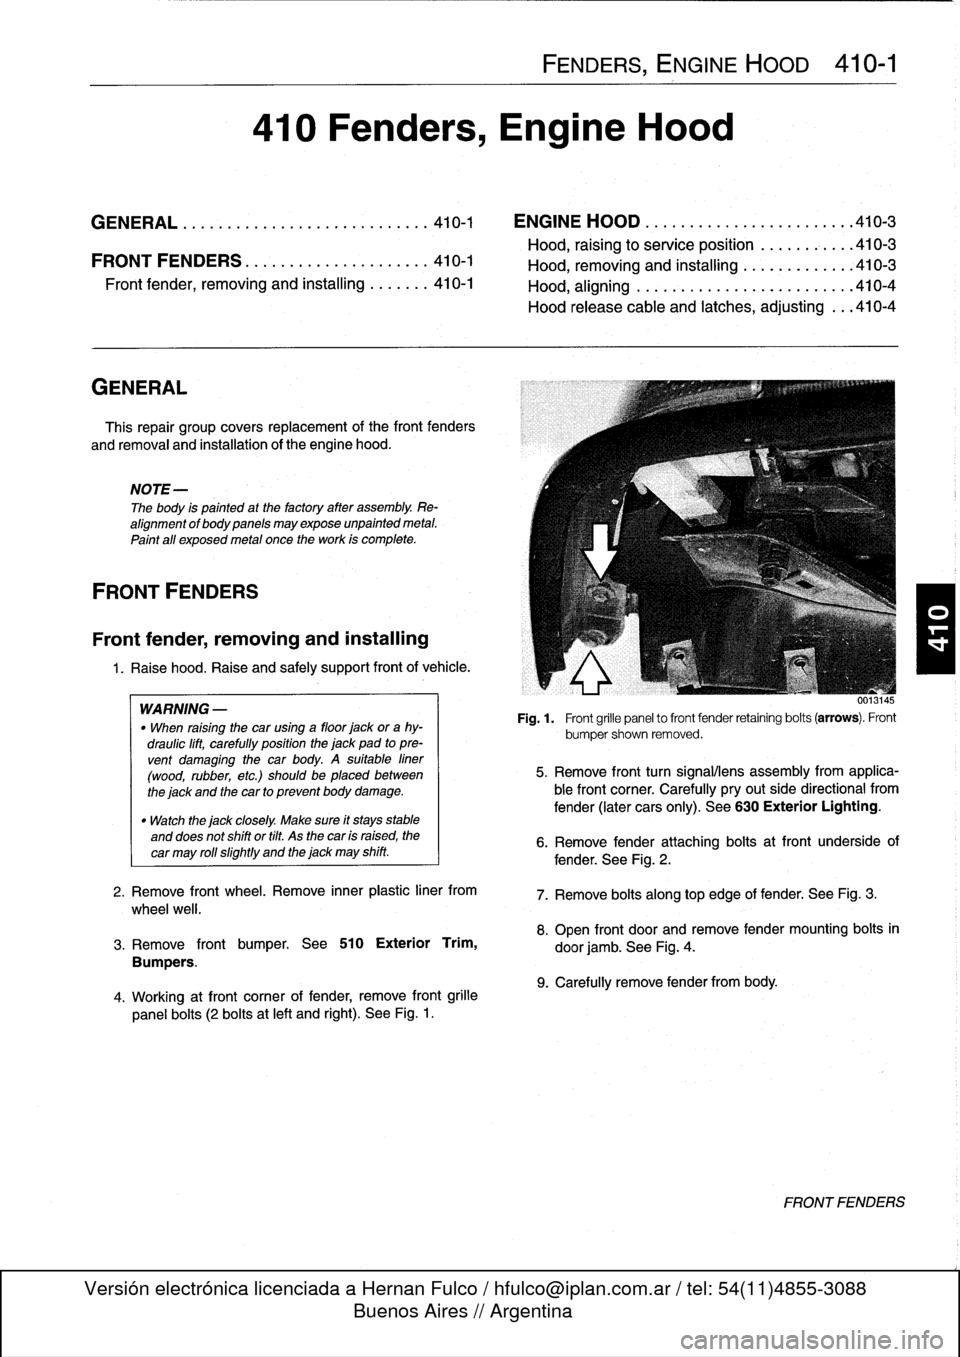 BMW 323i 1998 E36 Workshop Manual 
GENERAL

This
repair
group
covers
replacement
of
the
front
fenders

and
removal
and
installation
of
the
engine
hood
.

NOTE-

The
body
is
painted
at
the
factoryafter
assembly
.
Re-
alignment
of
body
